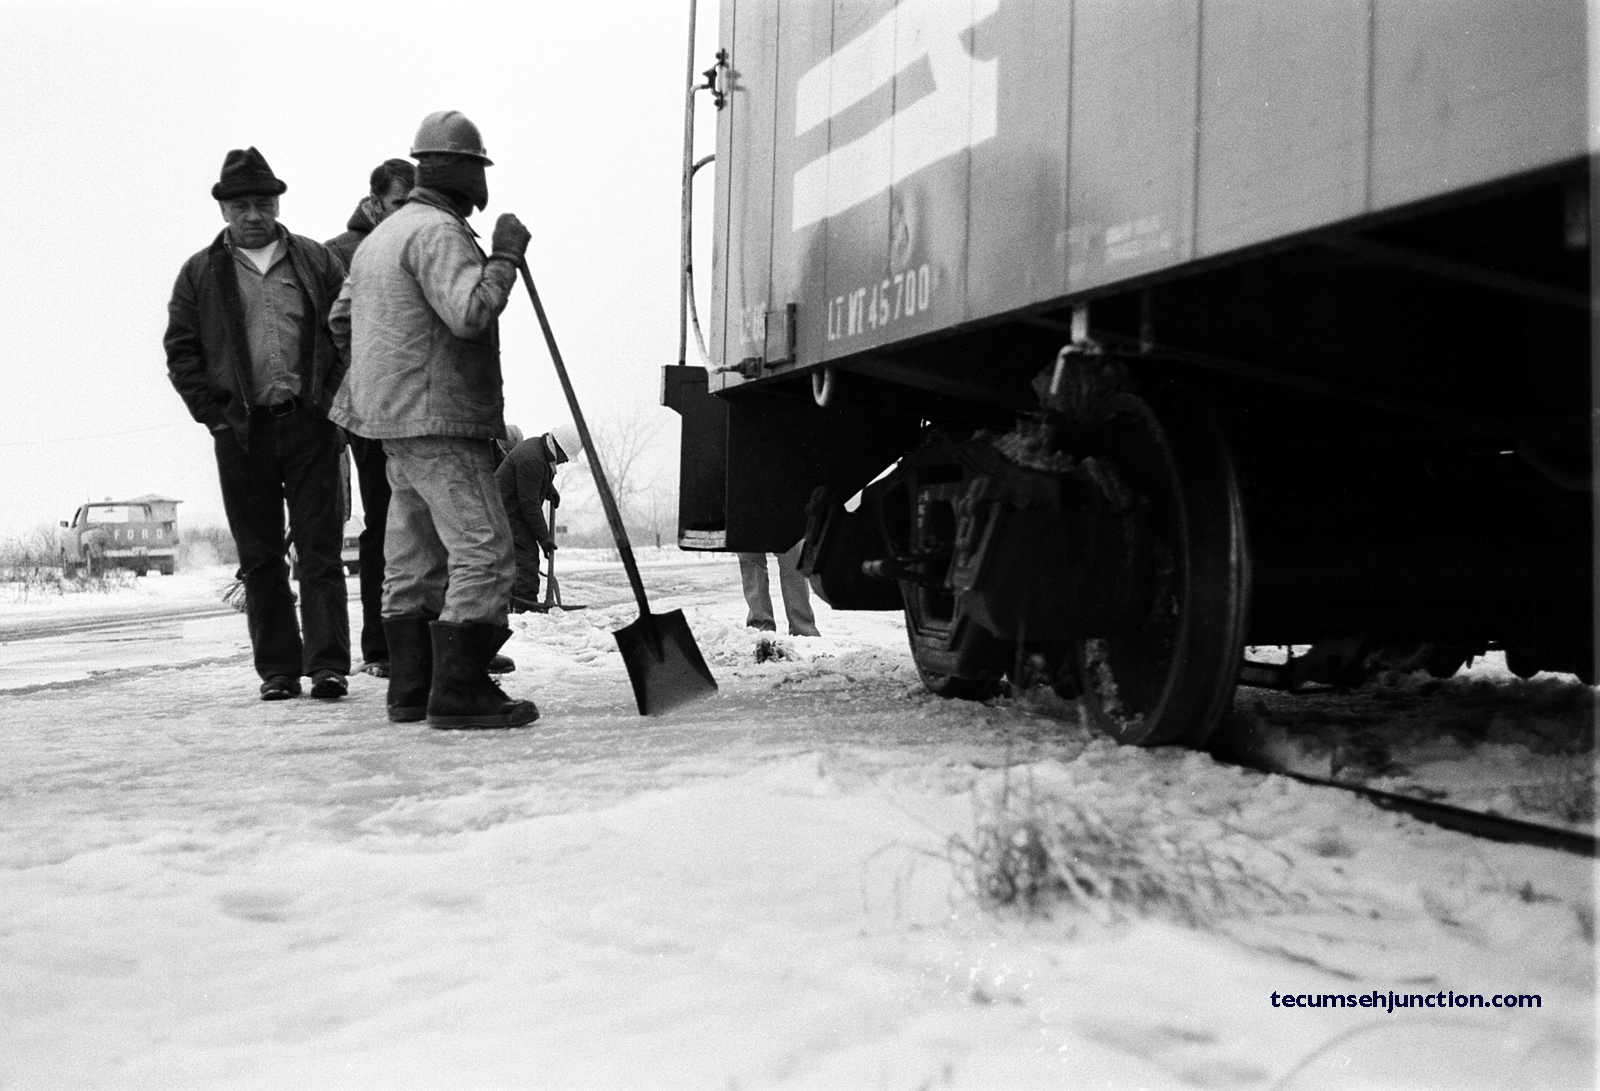 Conrail maintenance-of-way workers carefully observe as the as the caboose is backed over the Deerfield Road crossing.